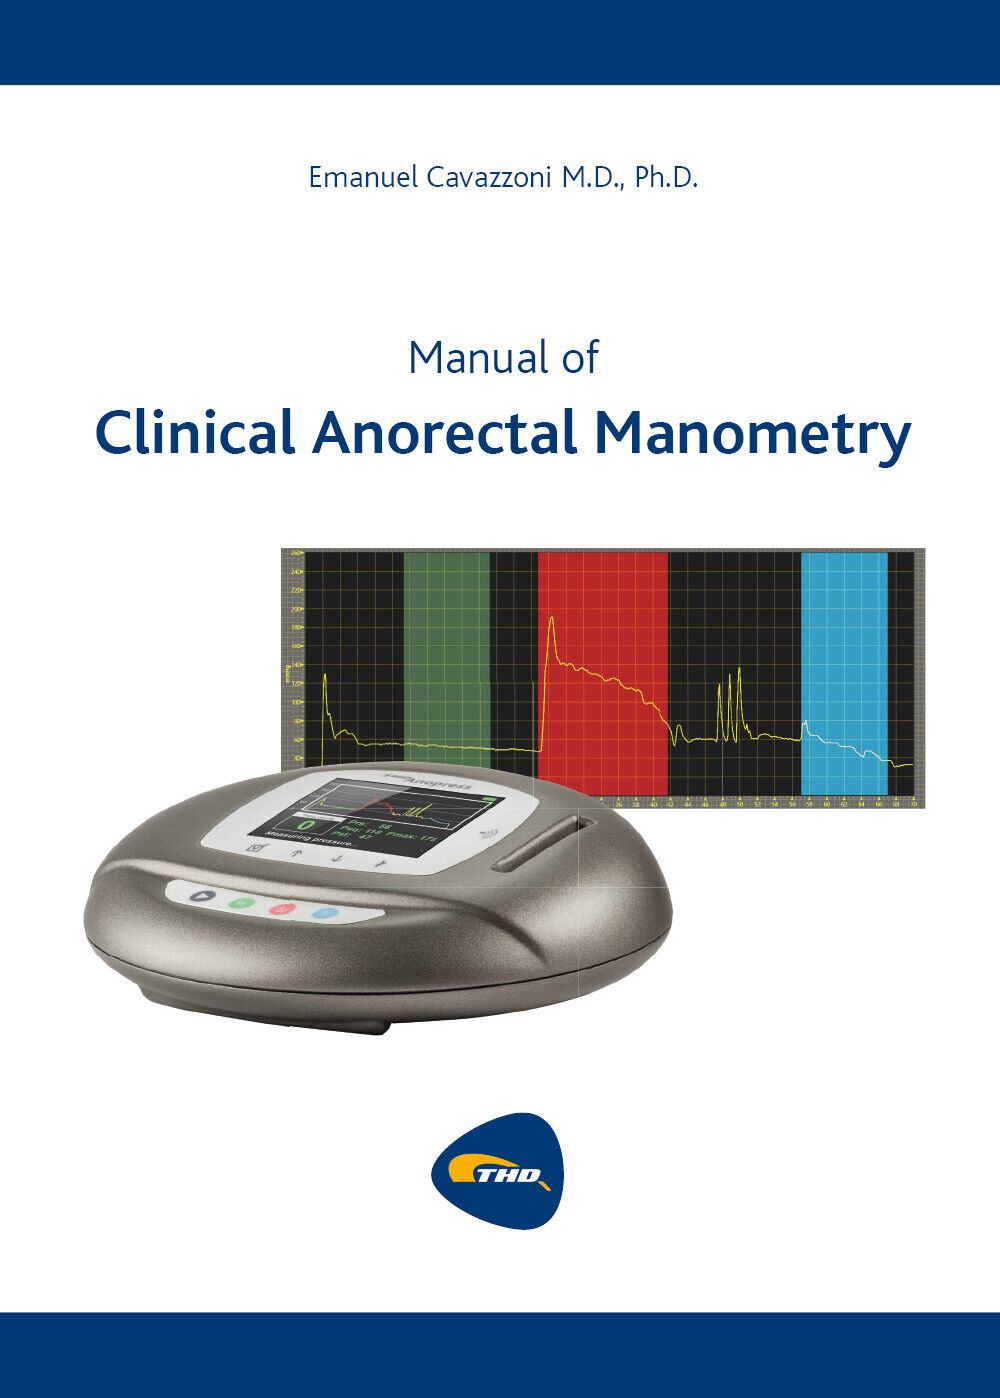 Manual of Clinical Anorectal Manometry di Emanuel Cavazzoni,  2021,  Youcanprint